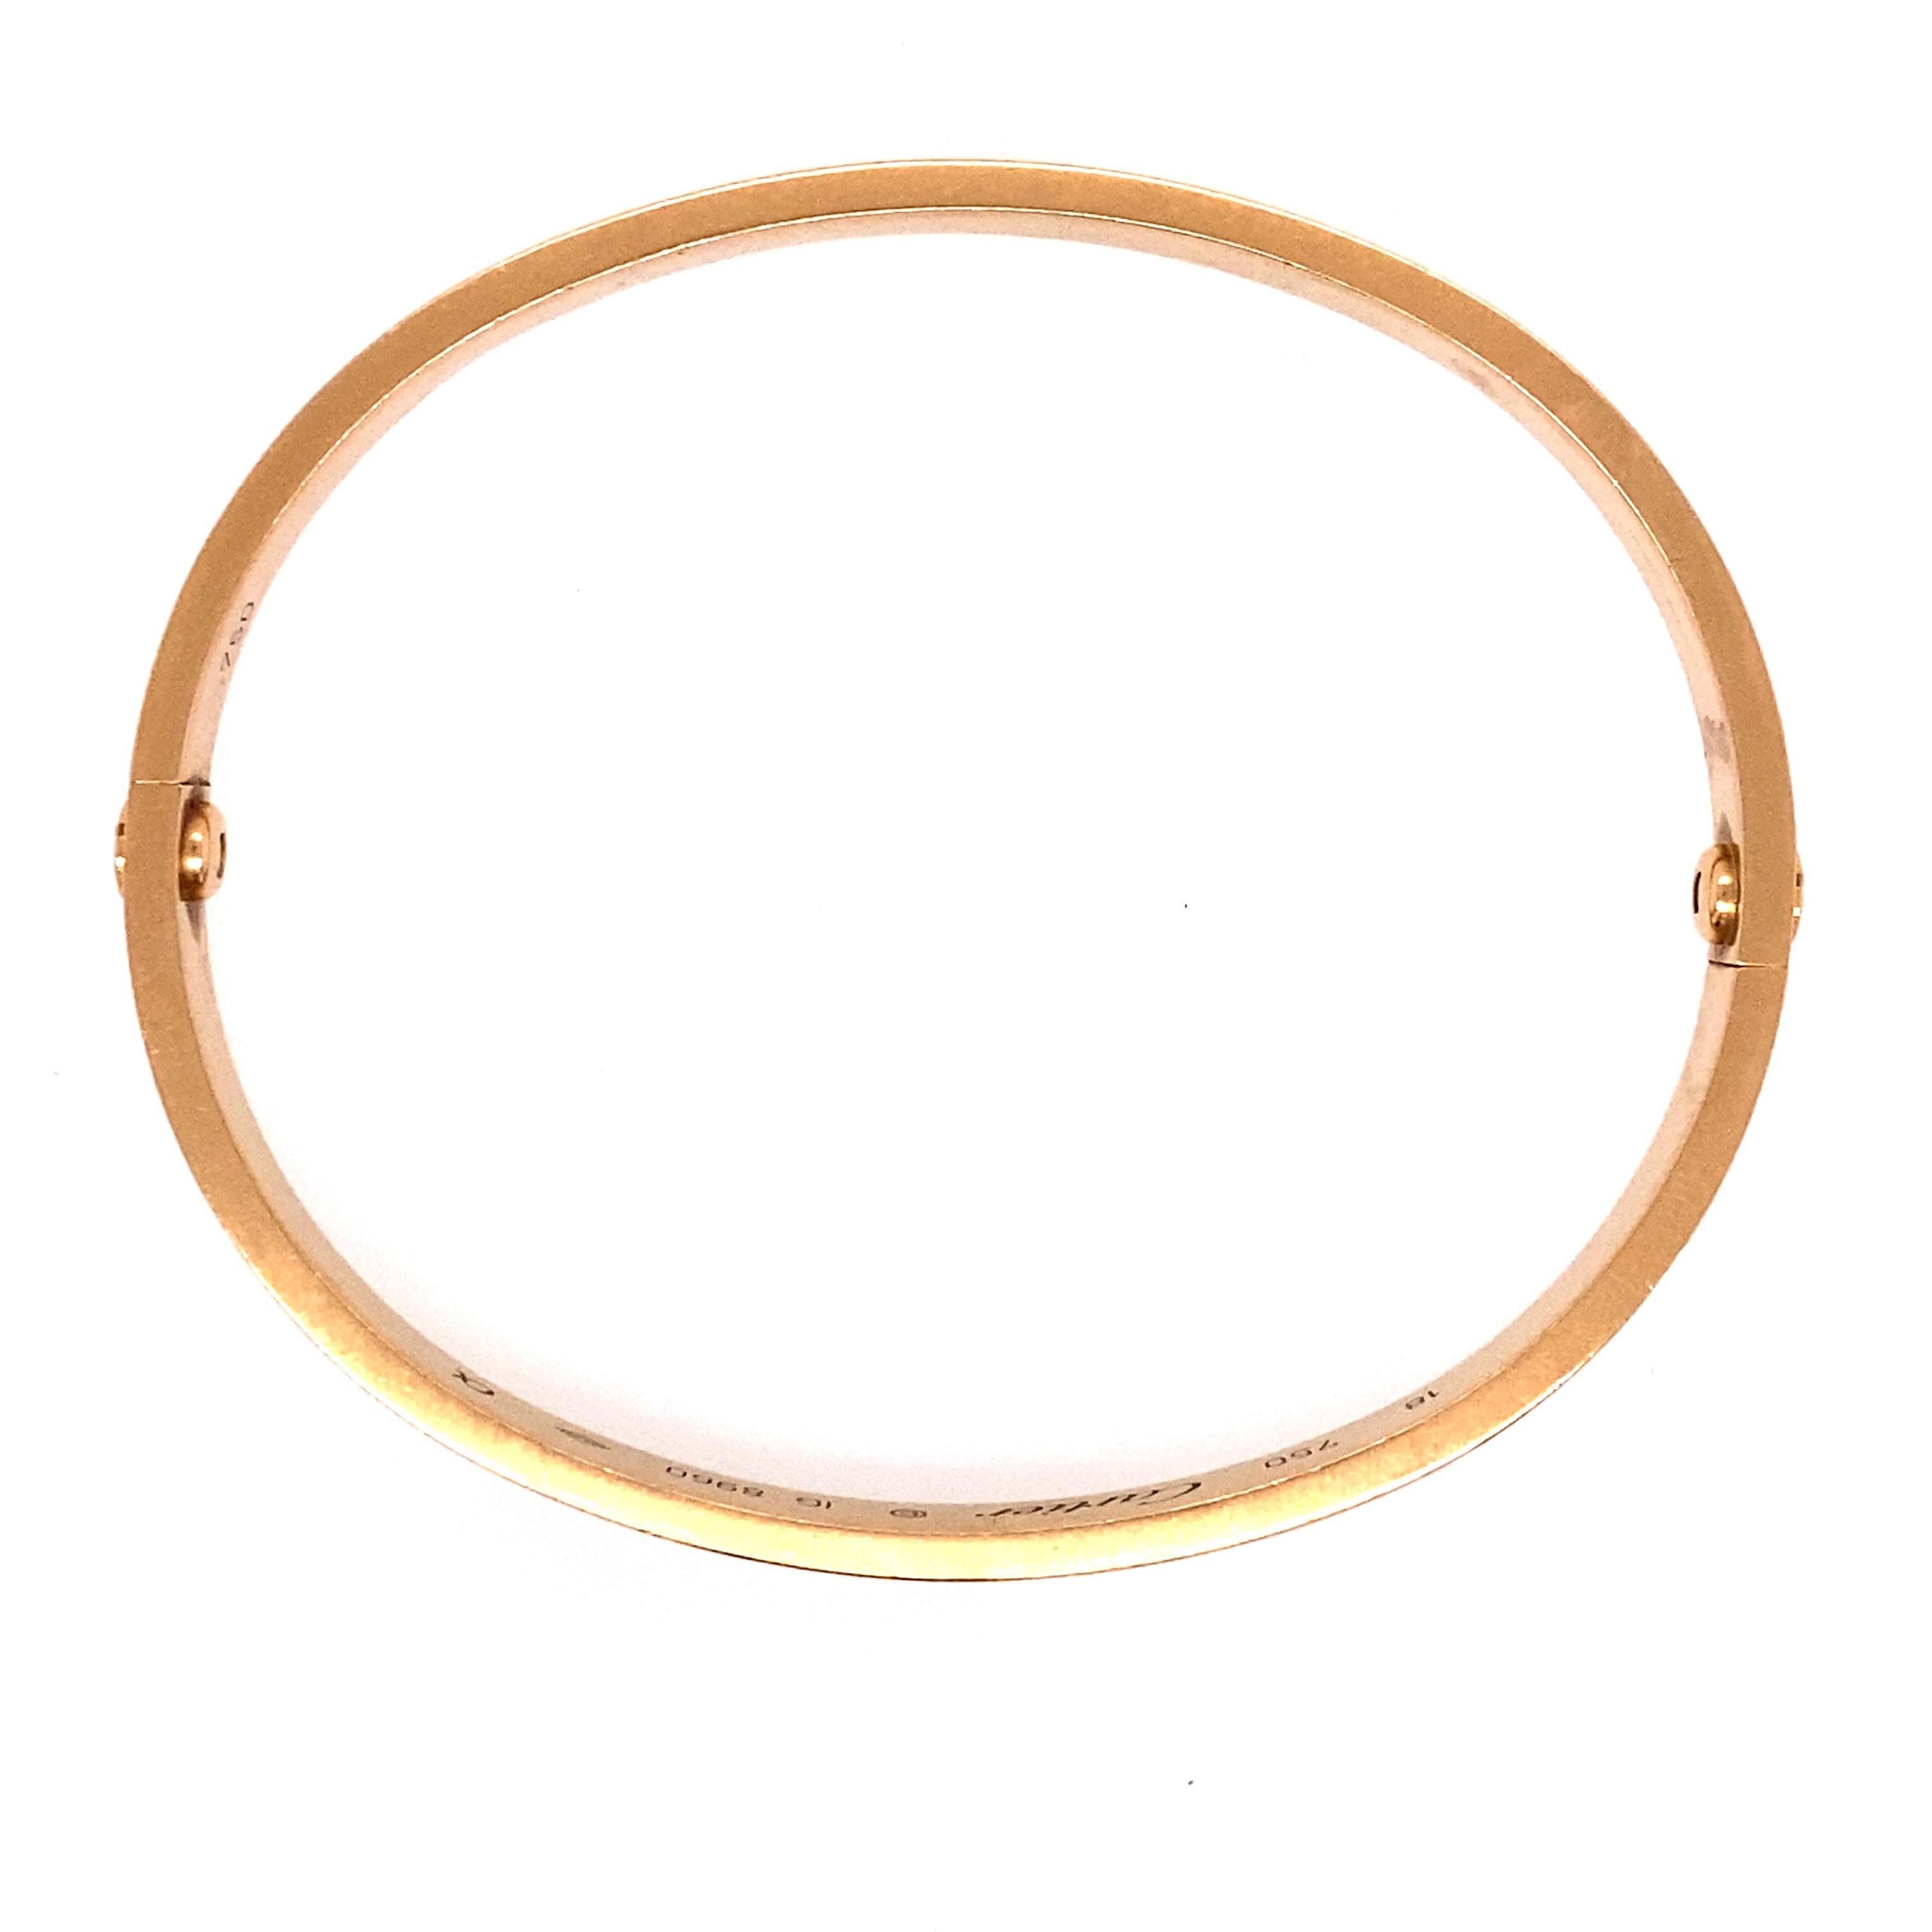 Cartier 18K rose gold Bangle 100% authentic. Width: 6.1mm. 
Comes with a screwdriver, certificate of authenticity and original box 

The iconic LOVE bracelet has been a symbol of free-spirited LOVE since 1969. Its screw motif and famous locking 